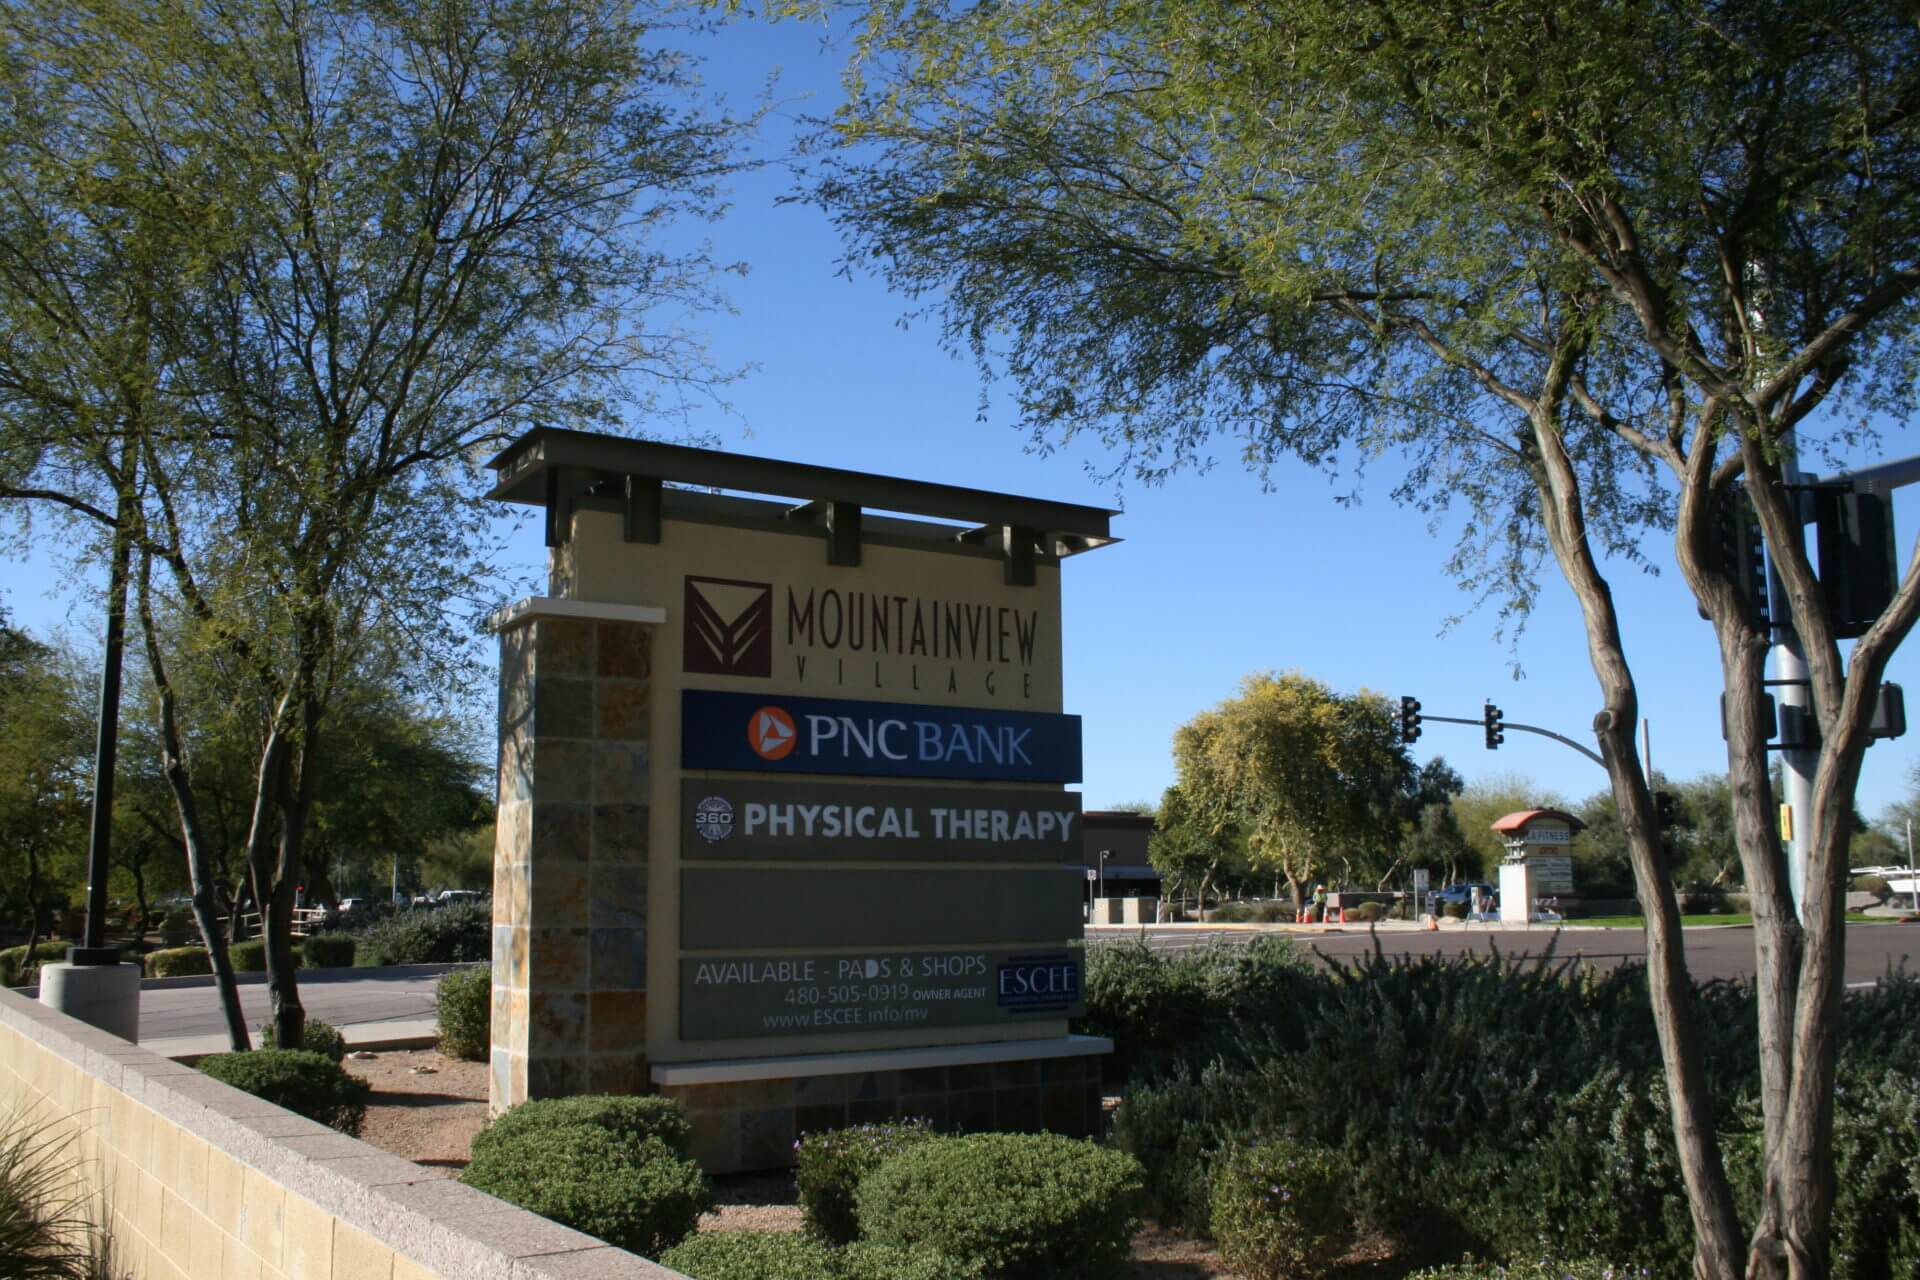 A sign for the physical therapy center in front of some trees.